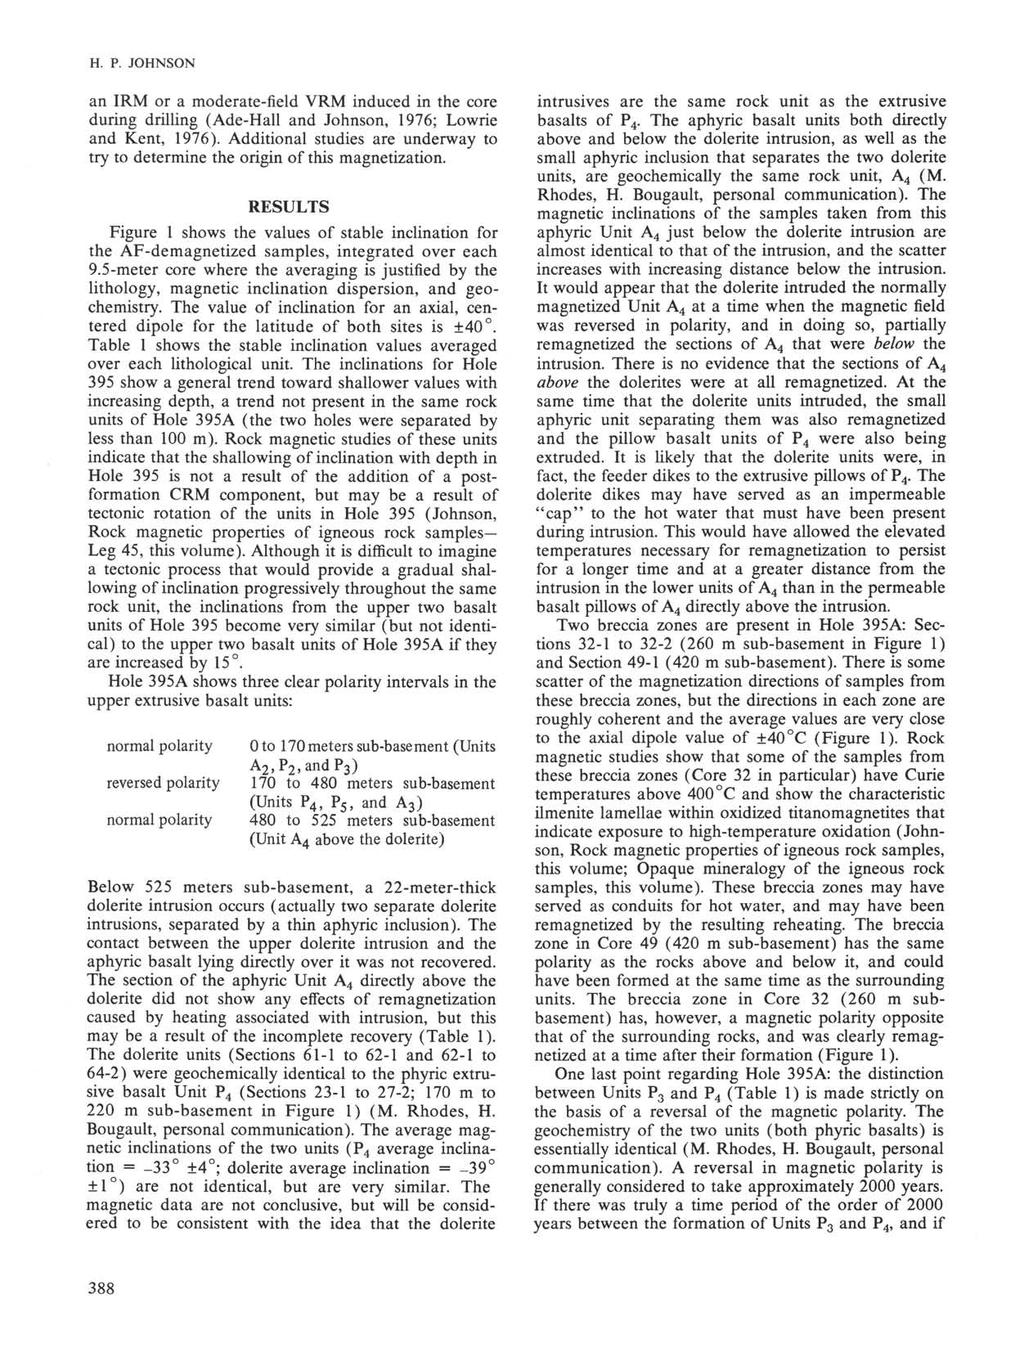 H. P. JOHNSON an IRM or a moderate-field VRM induced in the core during drilling (Ade-Hall and Johnson, 976; Lowrie and Kent, 976).